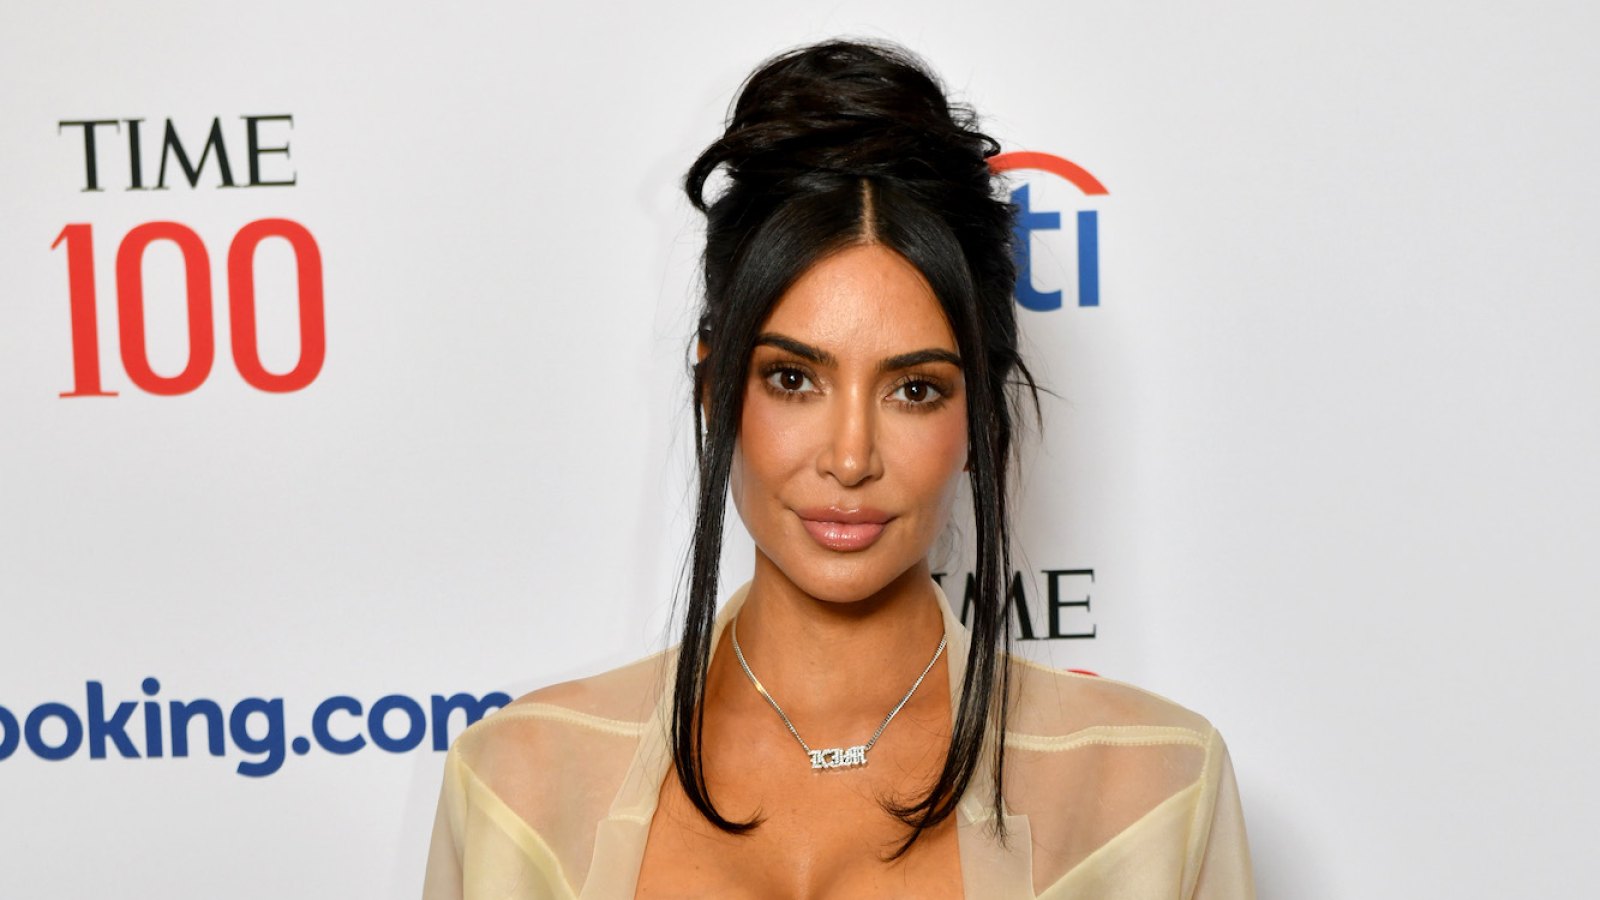 Kim Kardashian to Produce and Star in New Comedy Film The 5th Wheel